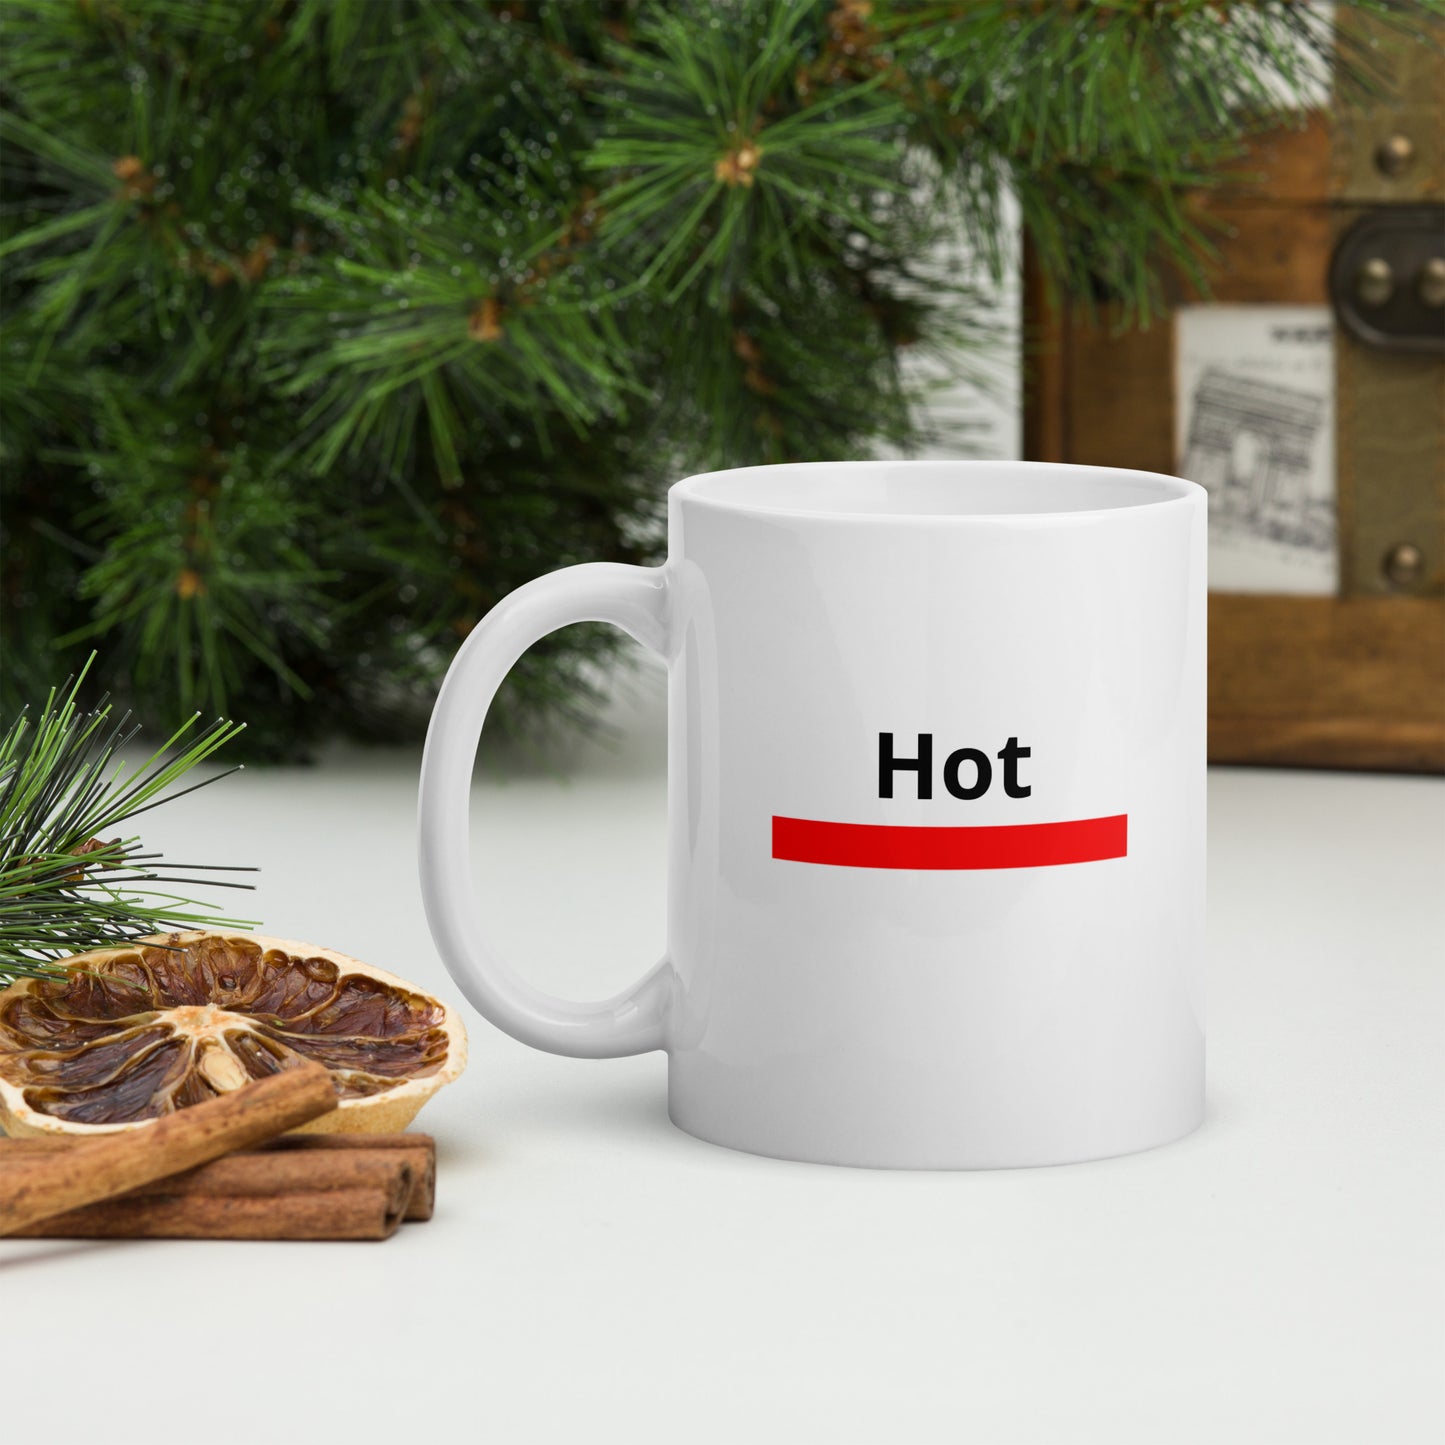 White mug that says 'Hot' with a red warning bar